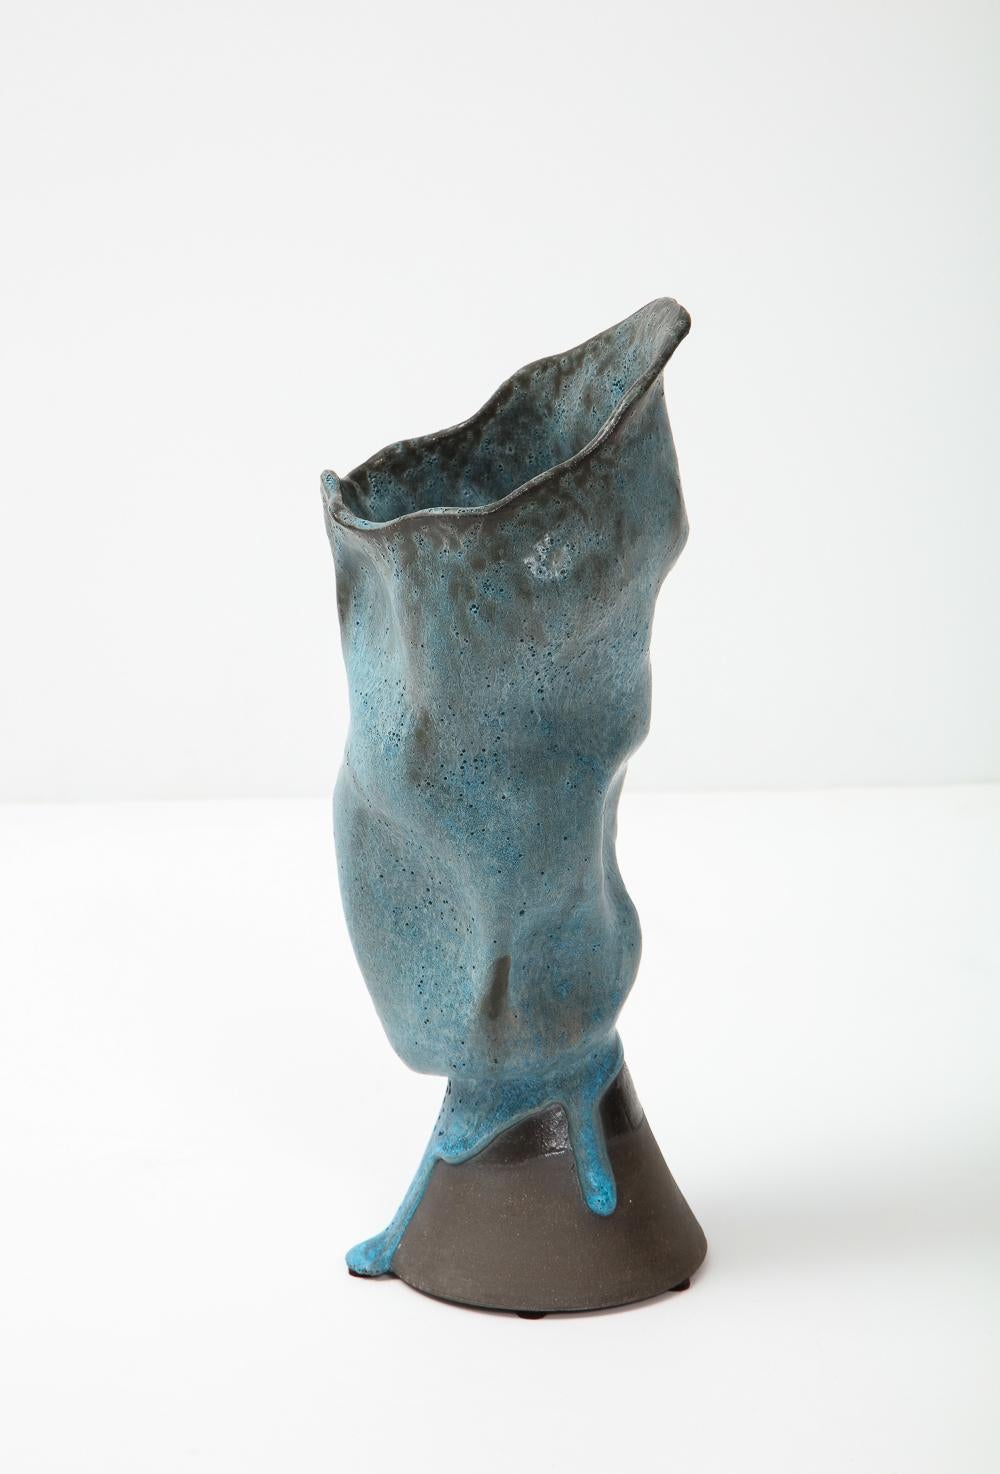 Glazed Vase with Cone Foot by David Haskell